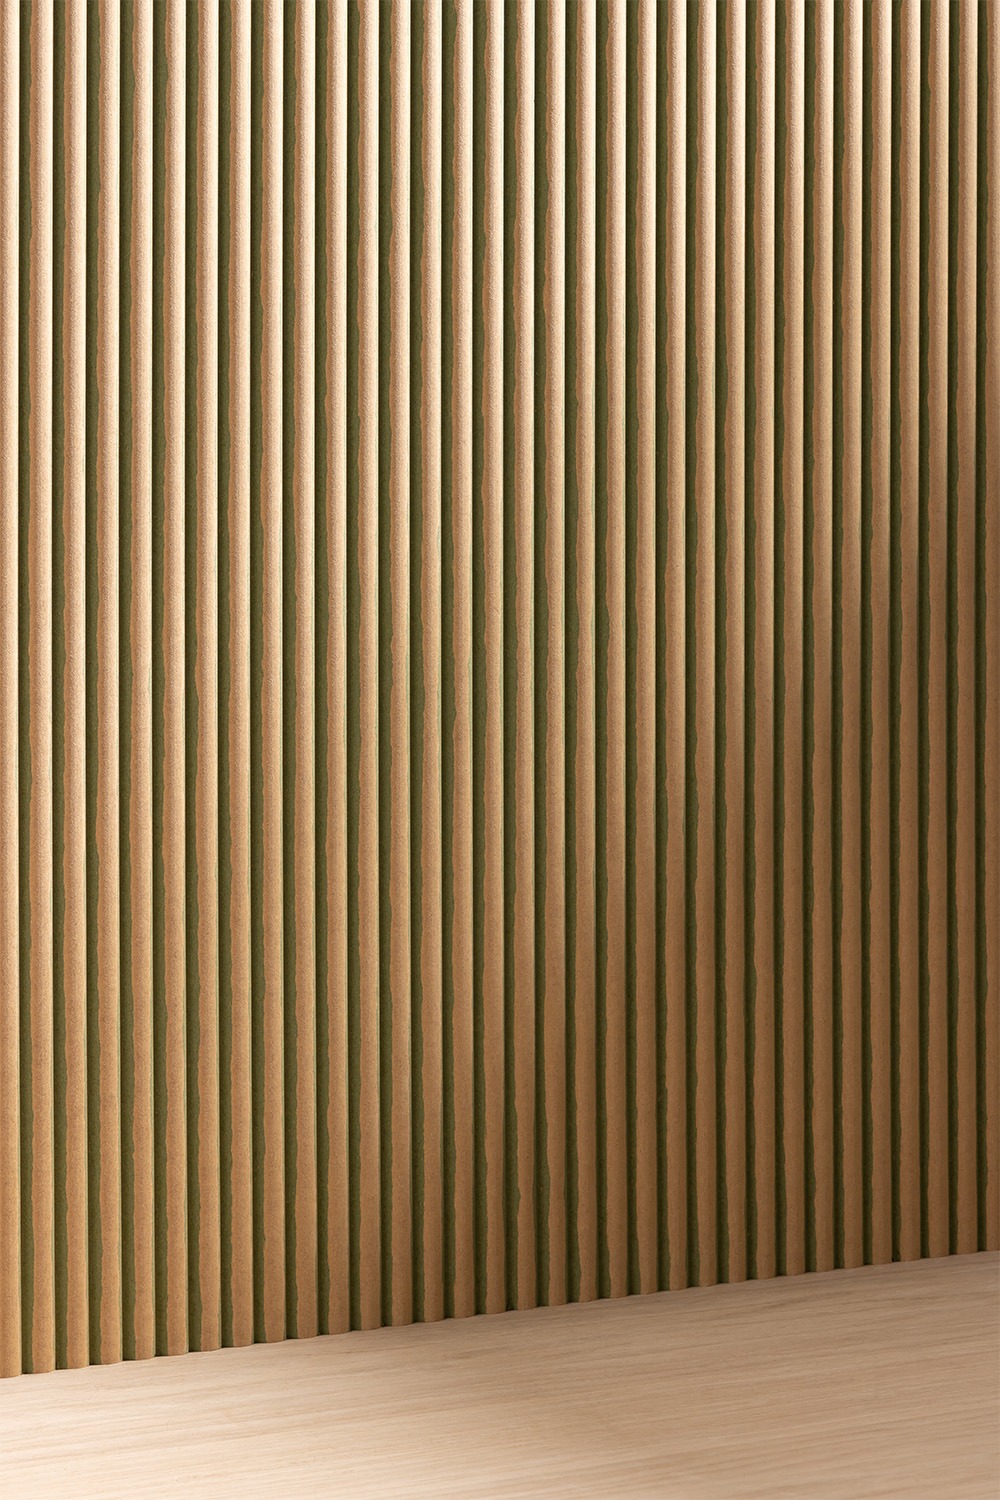 image to show example of a reeded wall panel